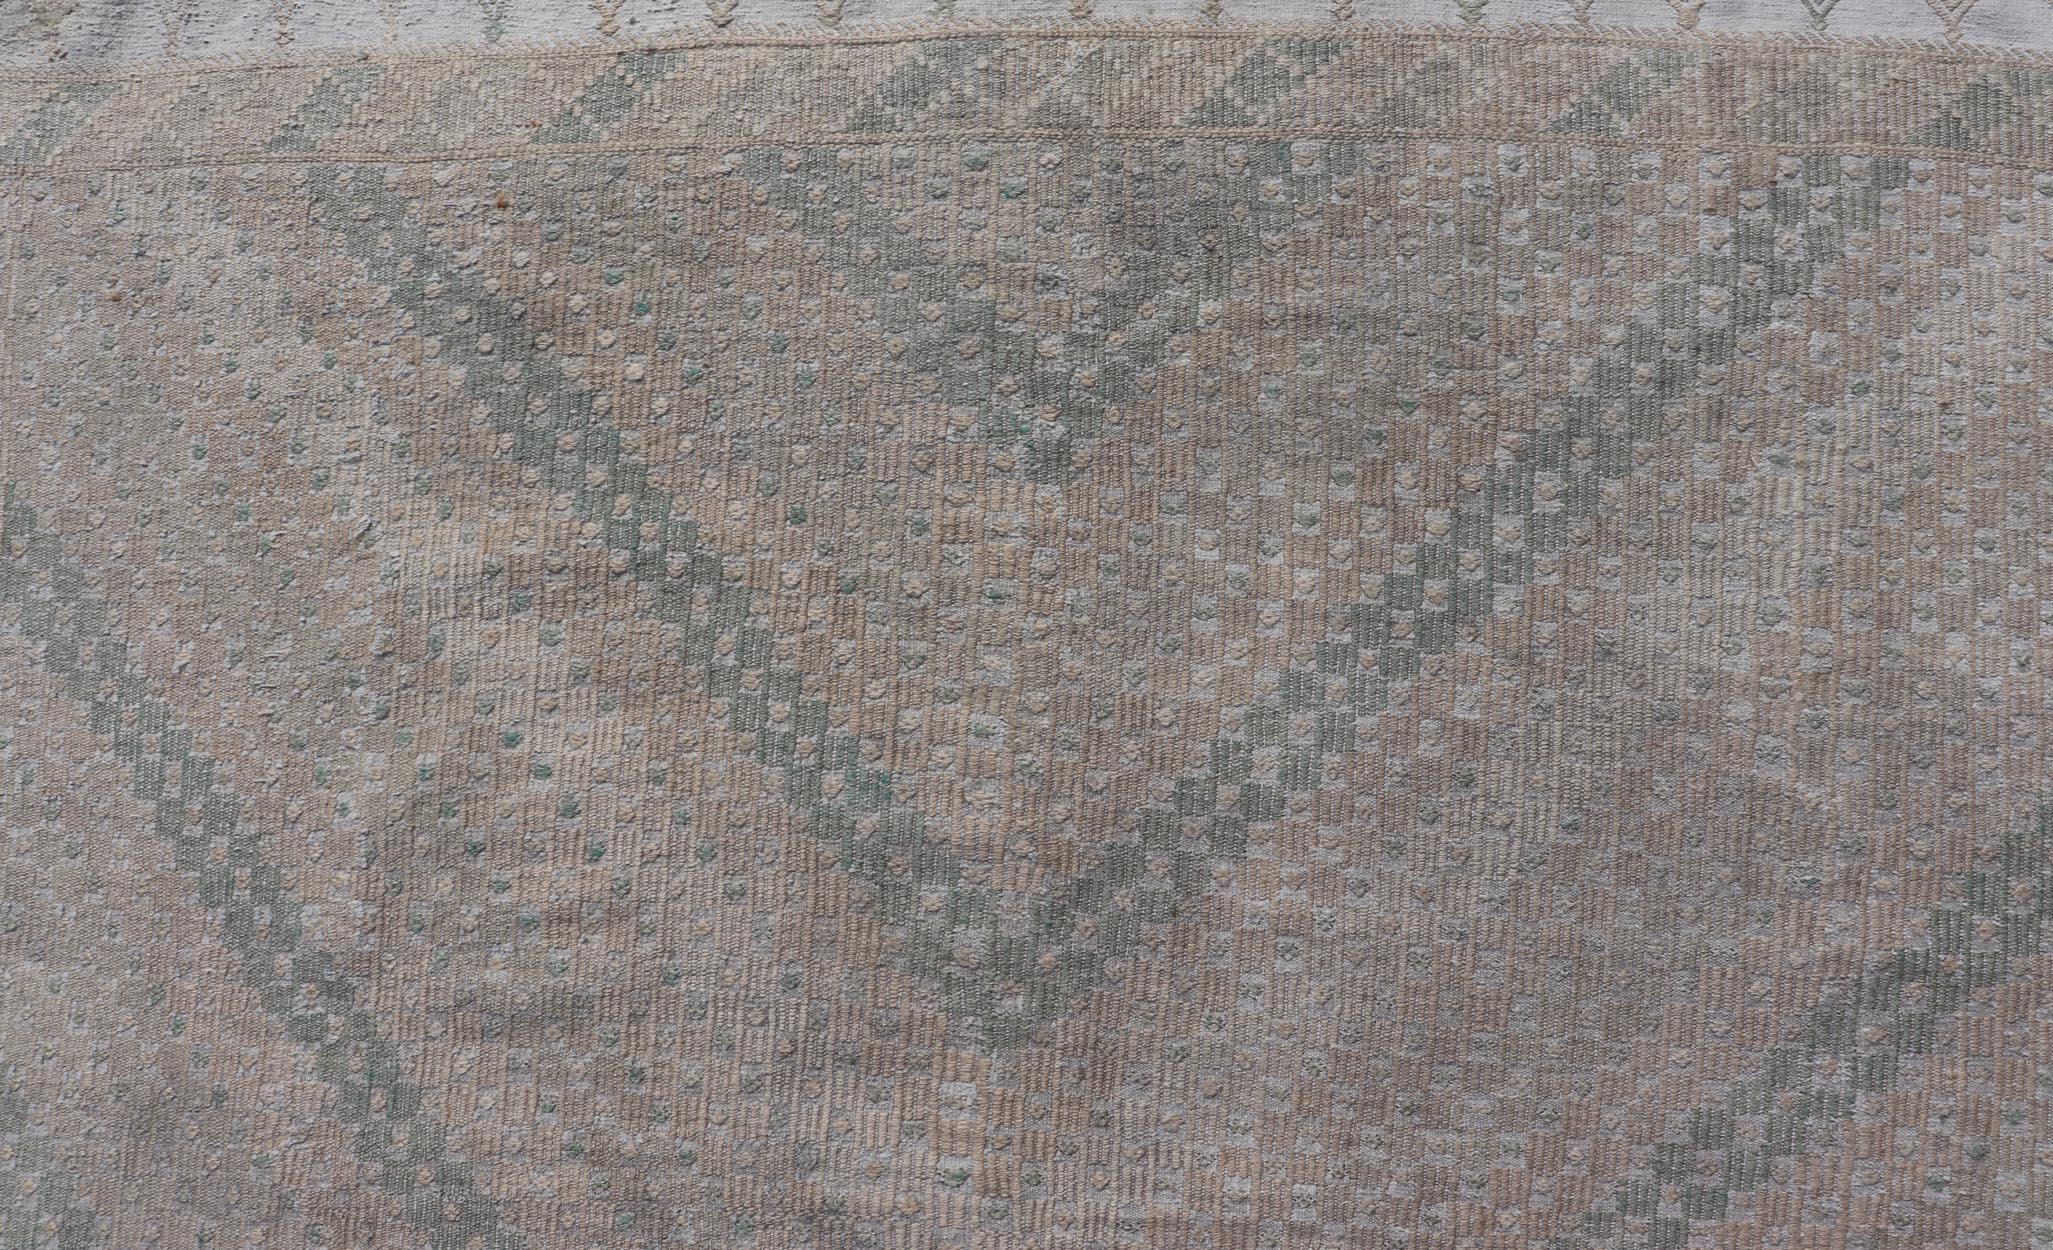 Wool Embroidered Vintage Hand Woven Turkish Kilim with Geometric Diamond Design  For Sale